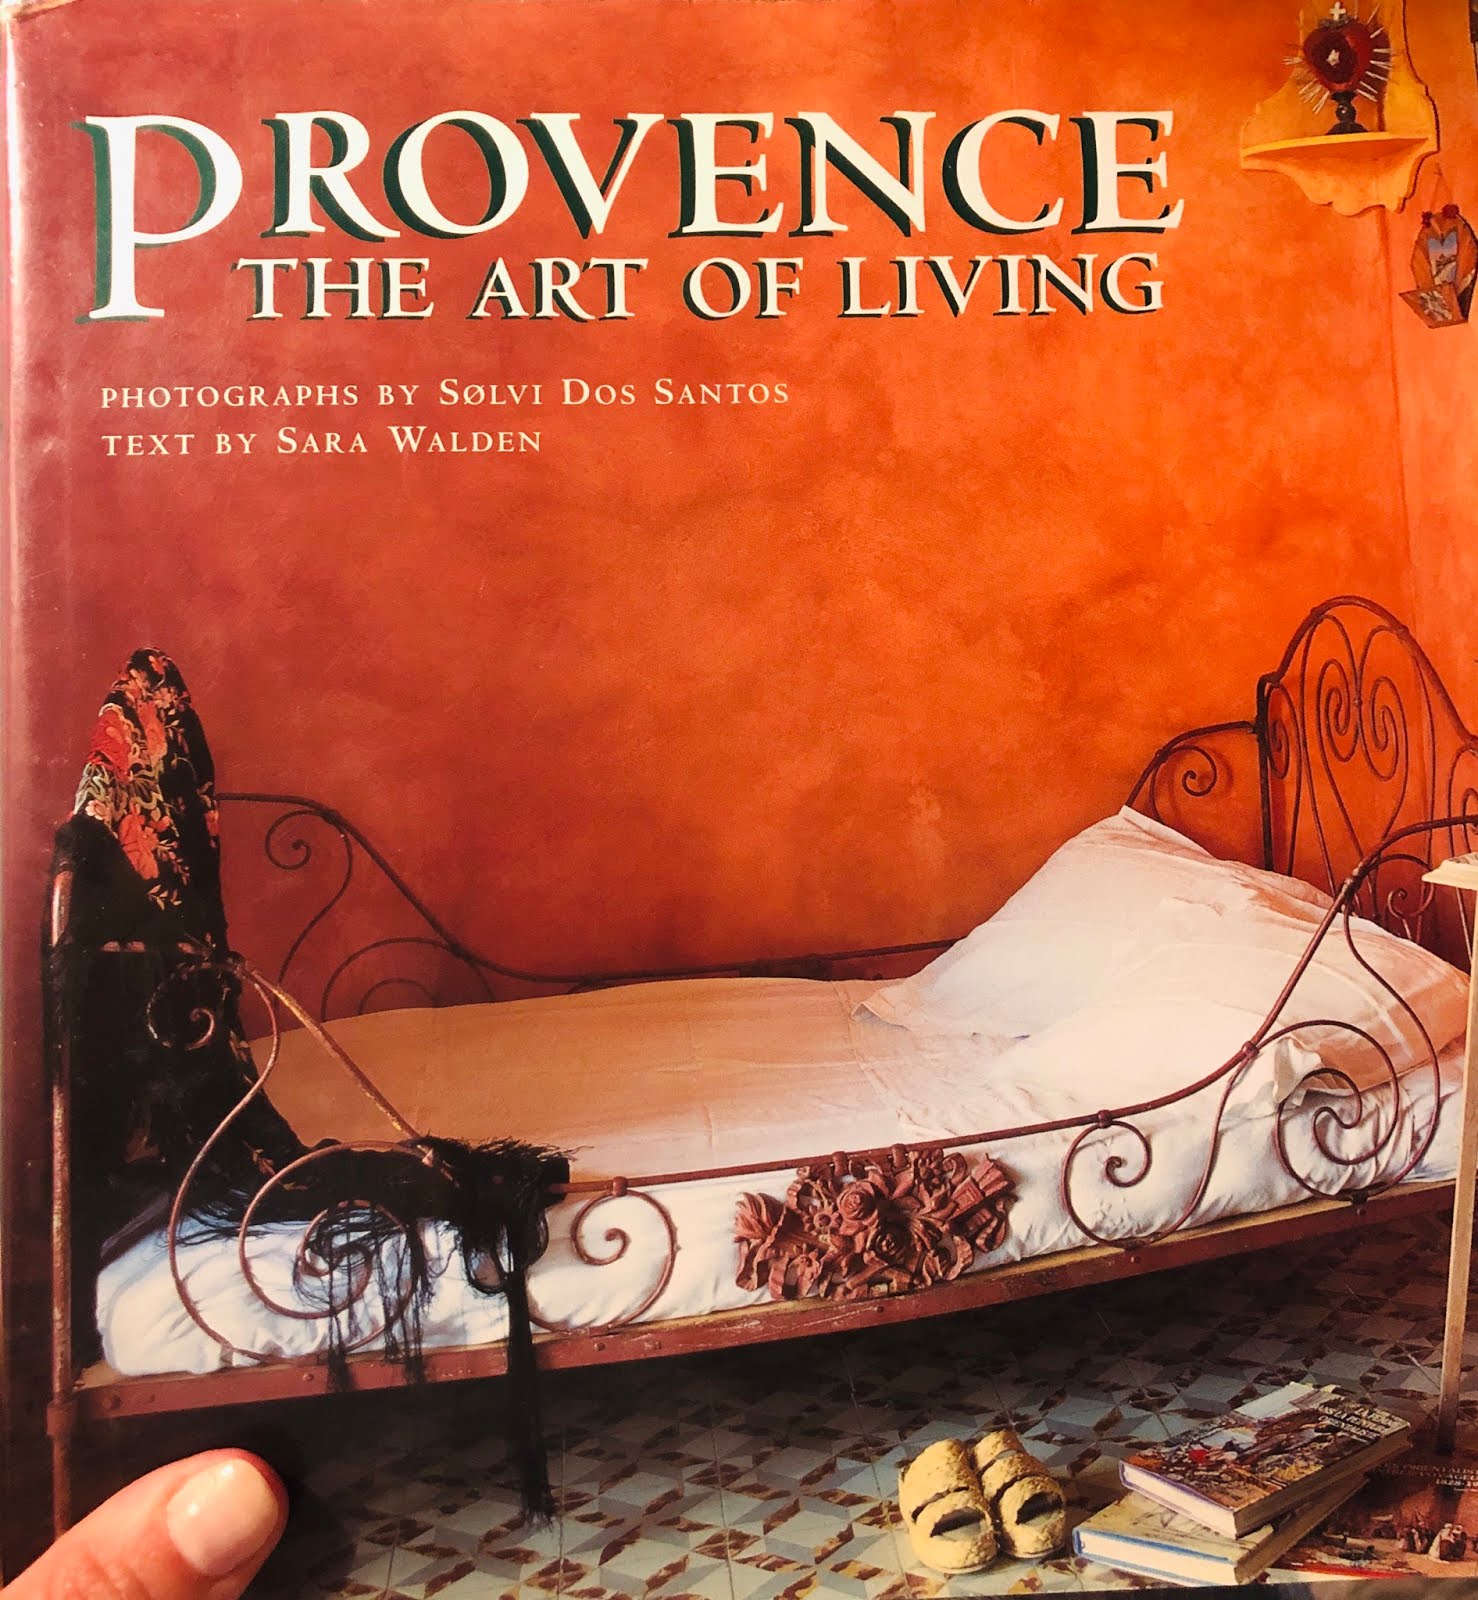 Provence the Art of Living